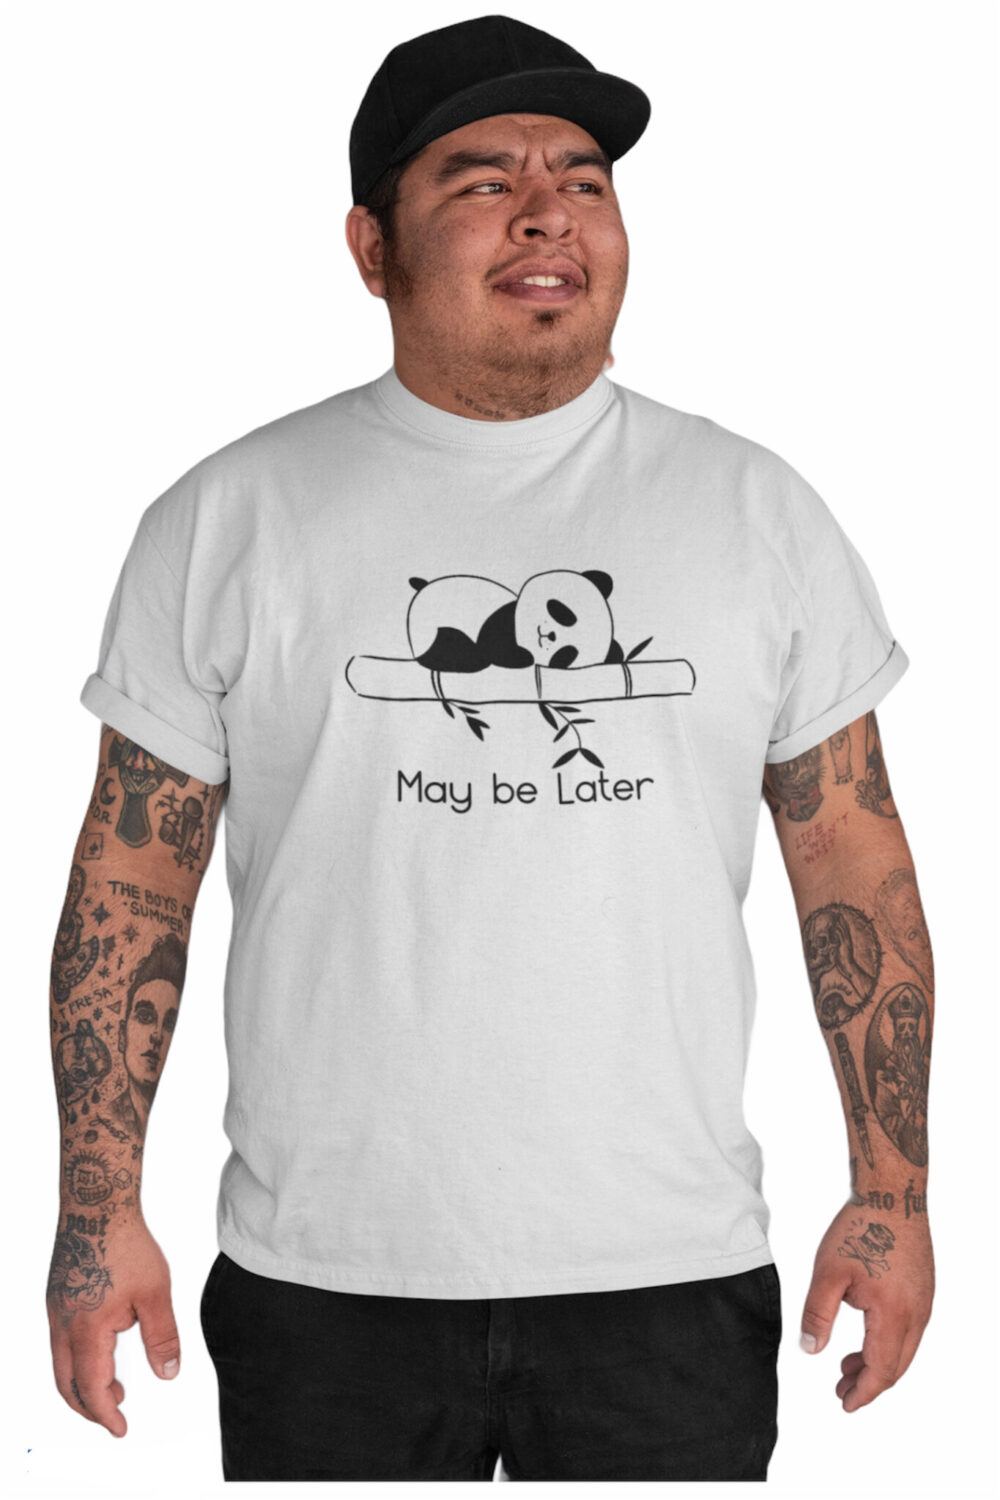 Maybe Later Half Sleeve Online Graphic White T shirt